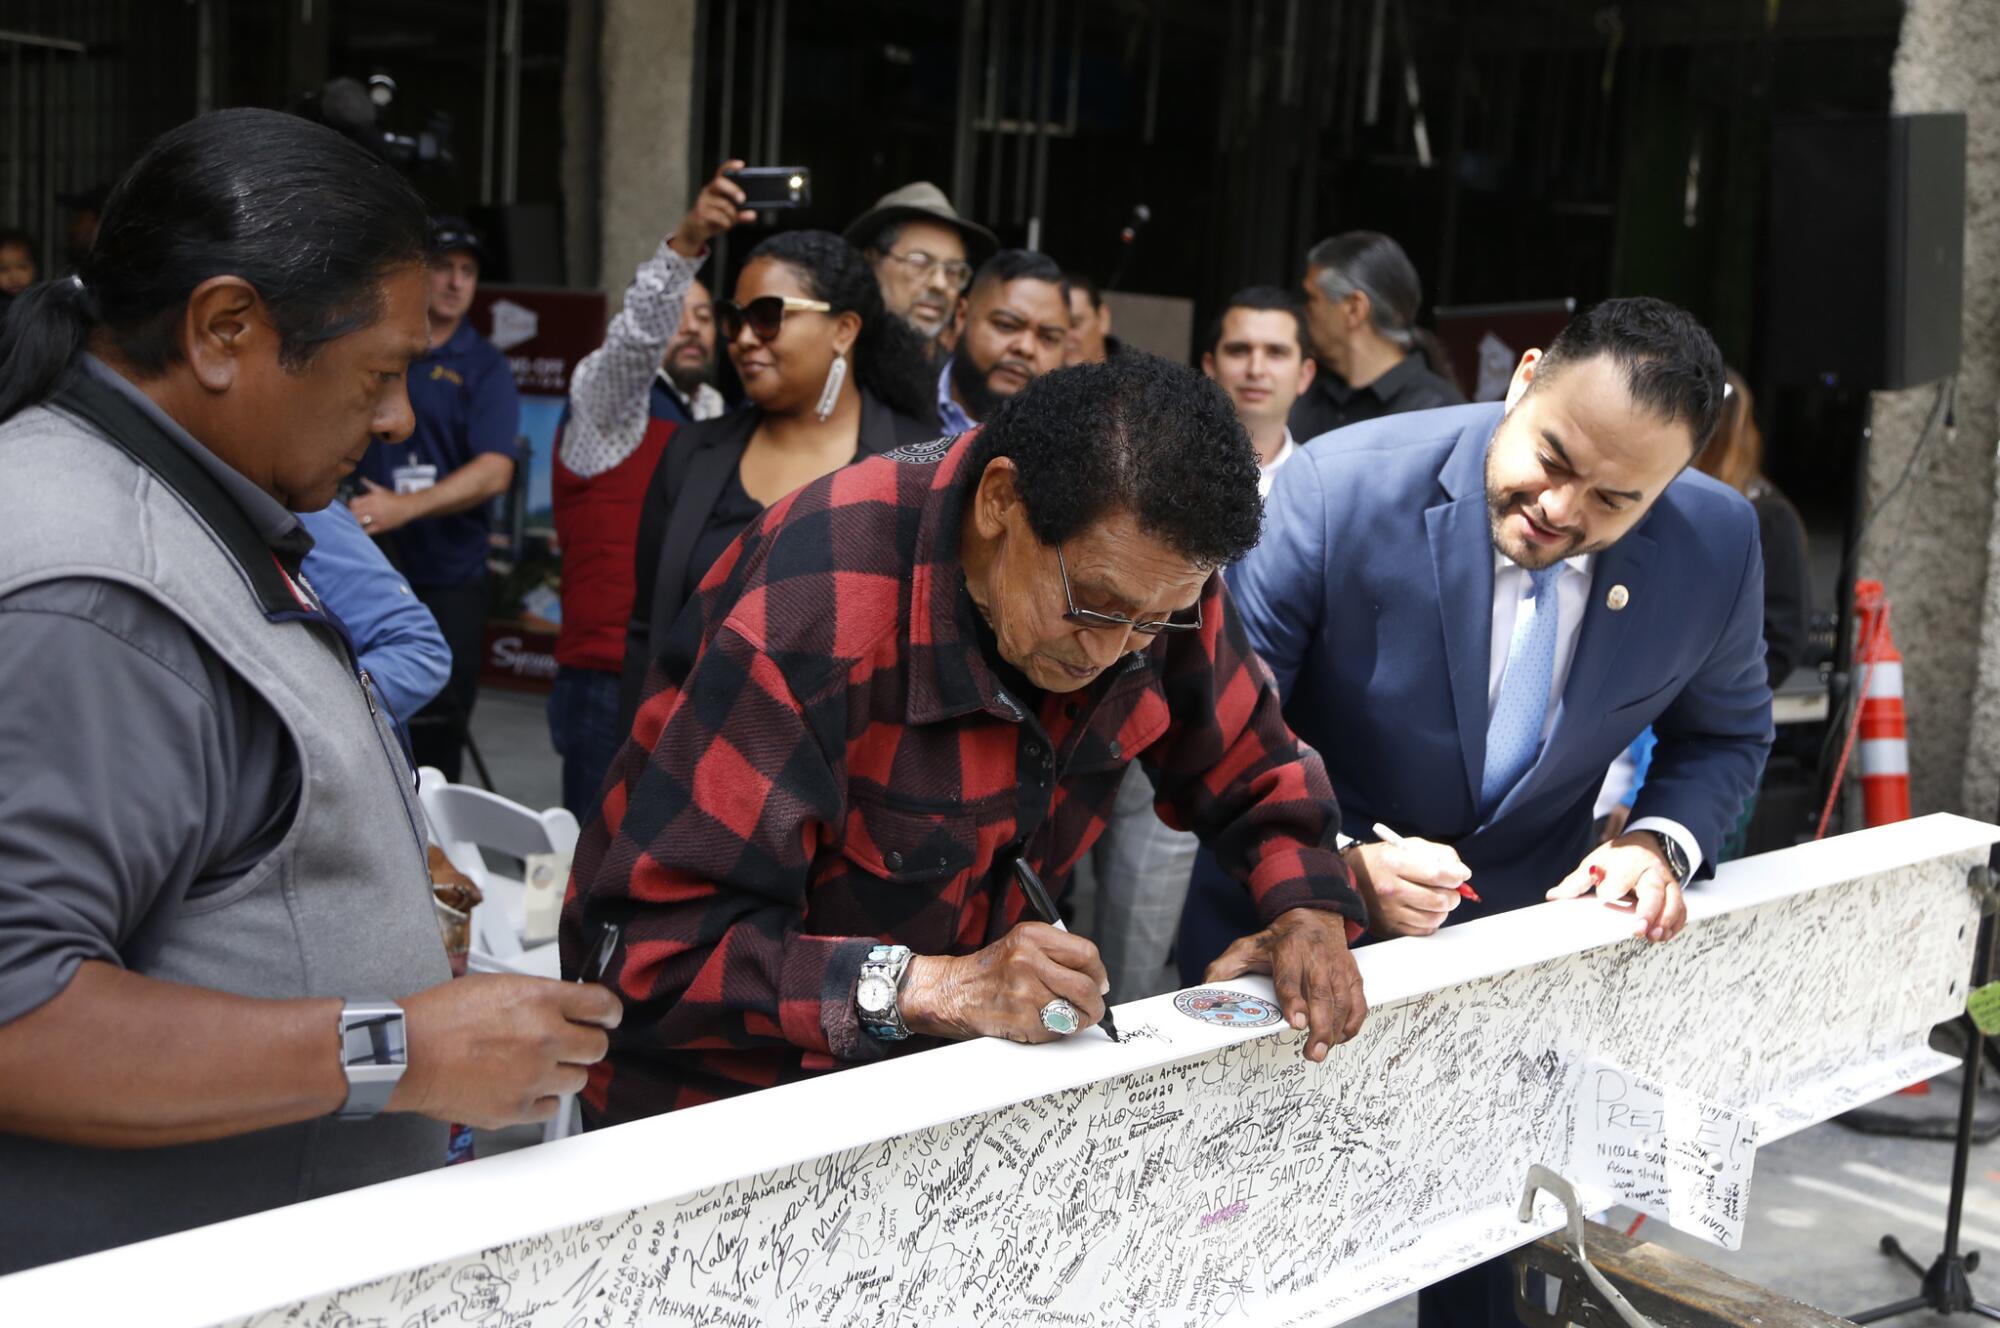 Former Sycuan Tribal Chairman Daniel Tucker, Tribal Elder George Prietto, and current Sycuan Tribal Chairman Cody Martinez sign the final steel beam of the tribe's first hotel in May 2018.